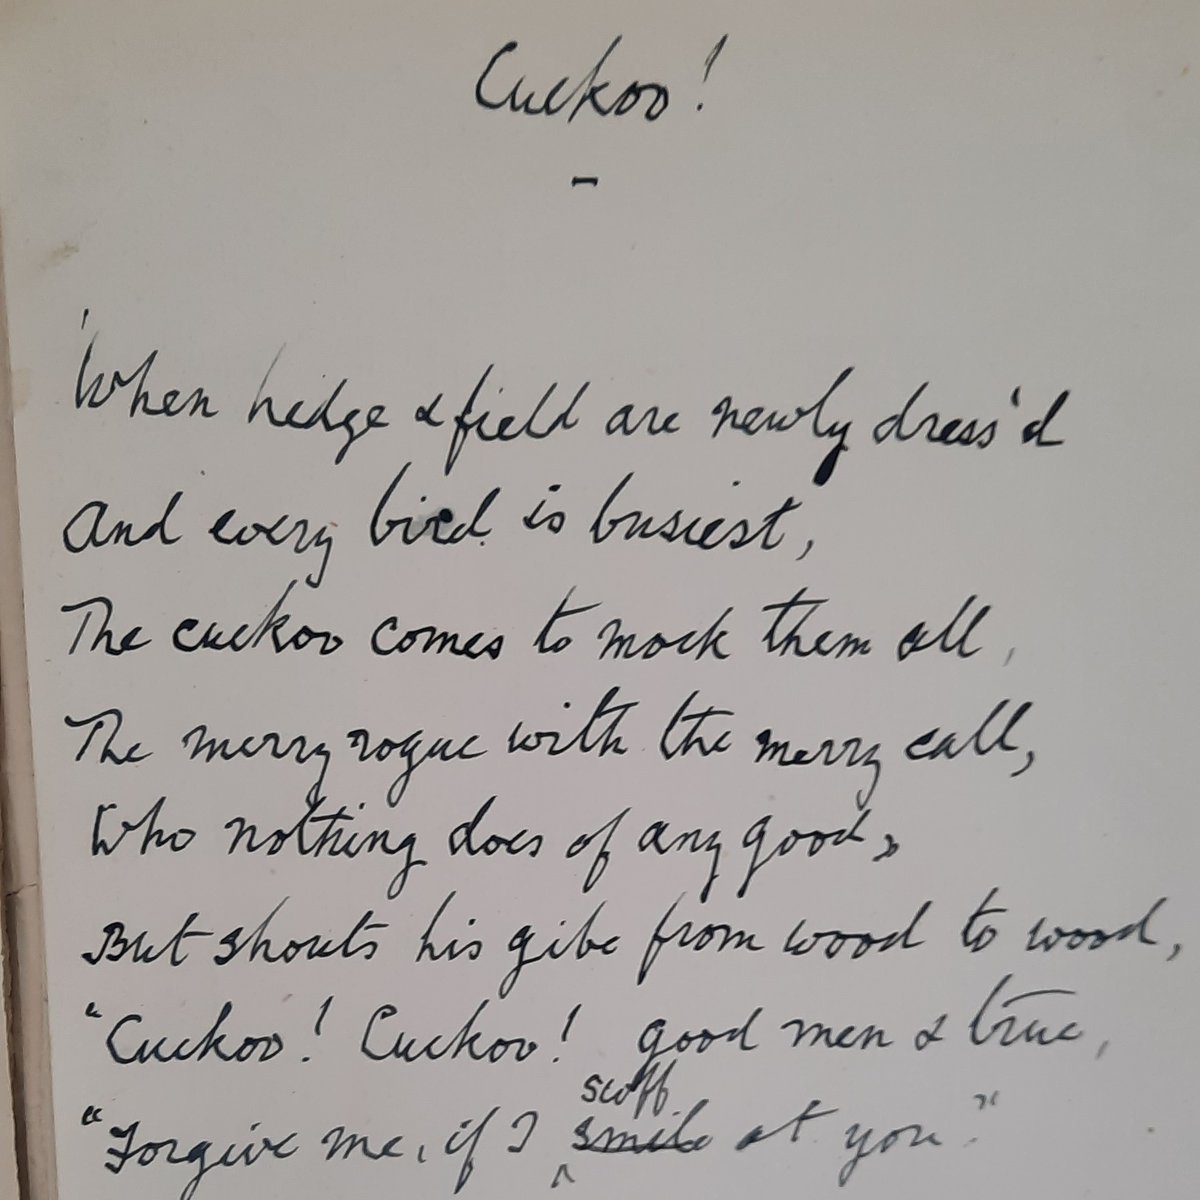 The 14th April is St Tiburtius' Day, when traditionally the first cuckoo of the year should be heard. This poem about the Cuckoo dates from the 1920s and is by Godfrey Fox Bradby, a member of the Bradby family of Hamble (46A06/A9/7/1) #hampshirearchives #hampshireheritage